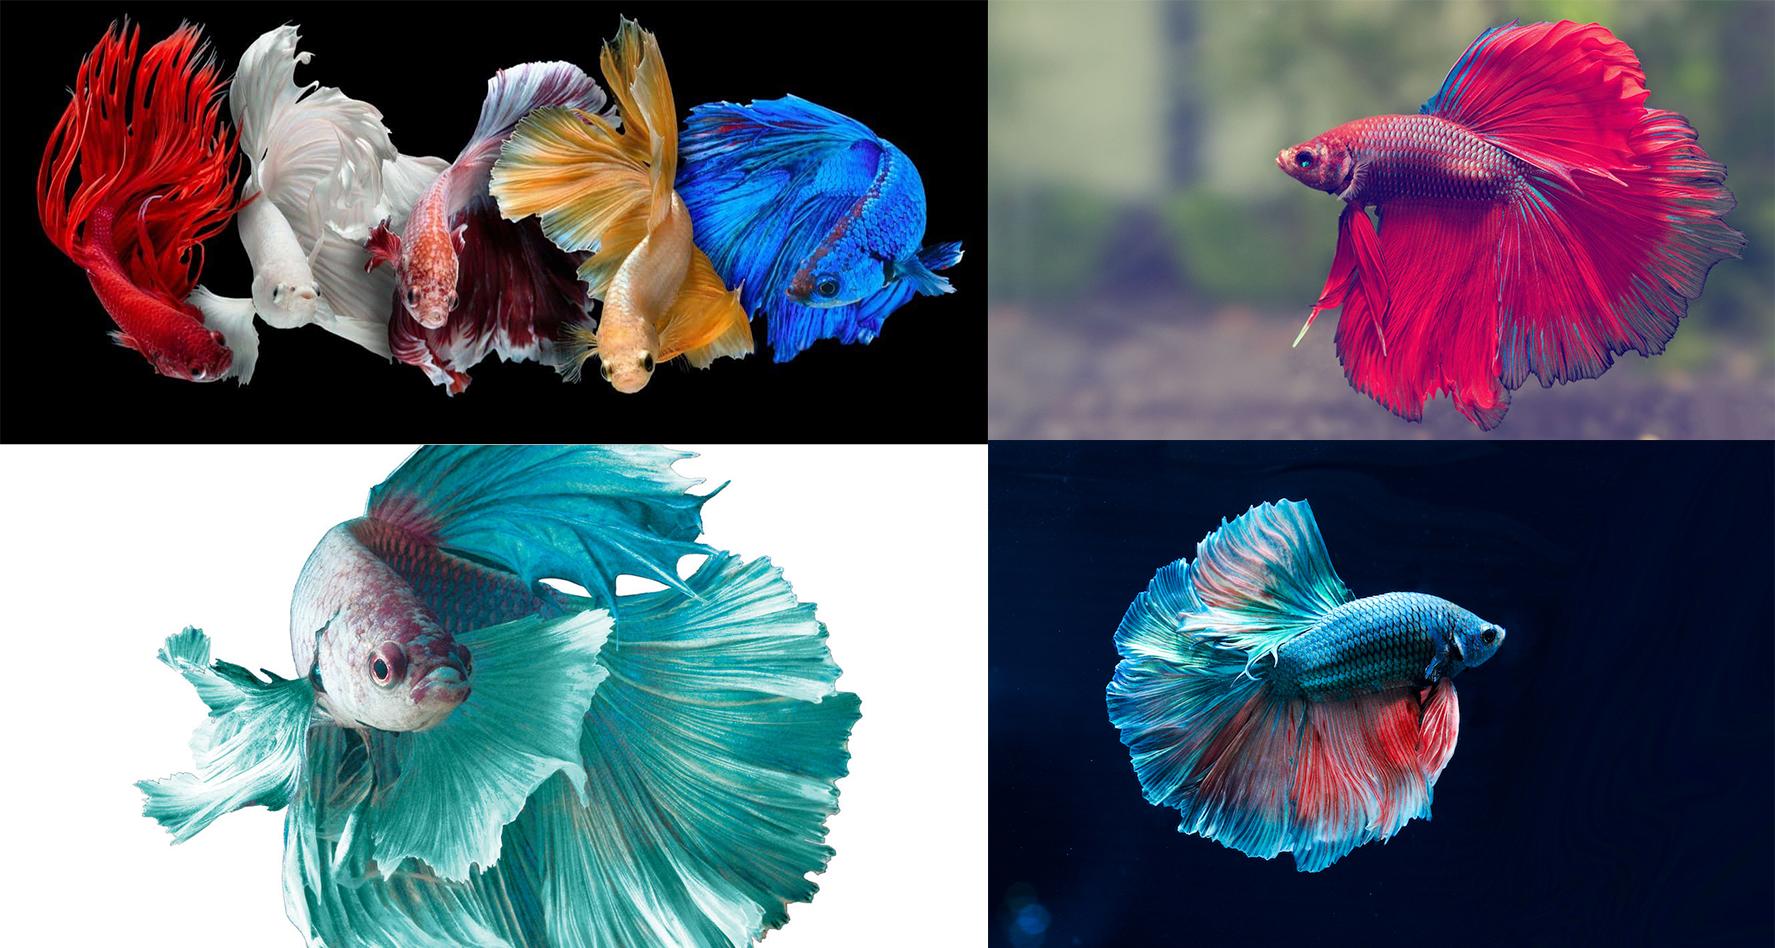 siamese fighting fish fighting each other